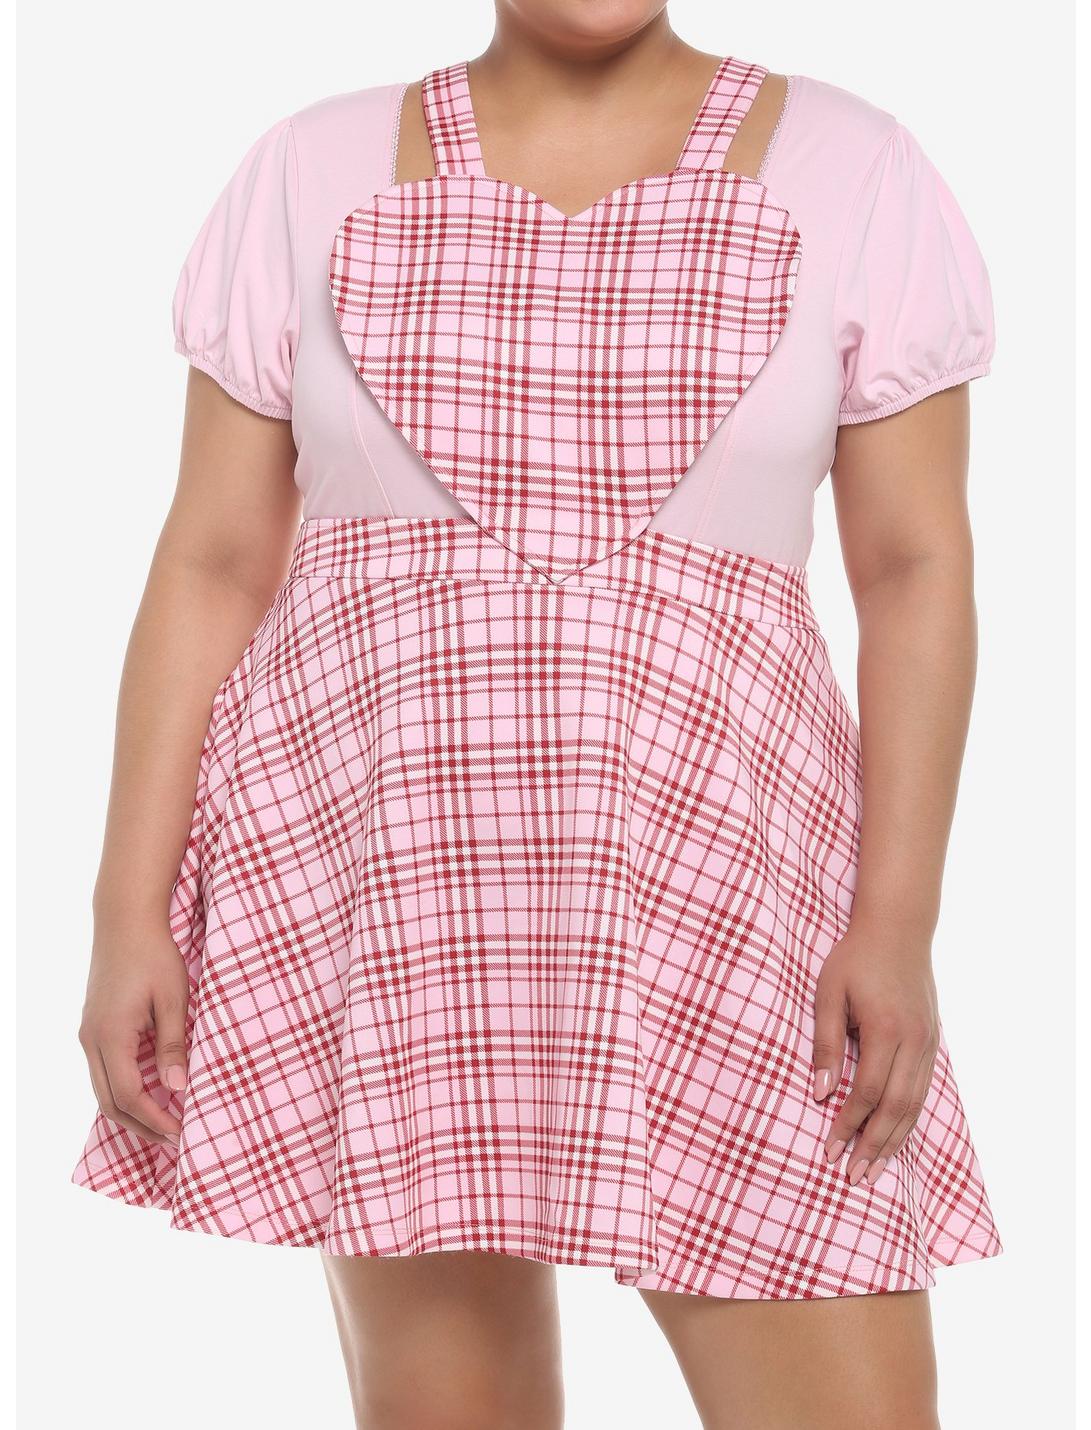 Pink & Red Plaid Heart Skirtall Plus Size, PLAID - PINK, hi-res